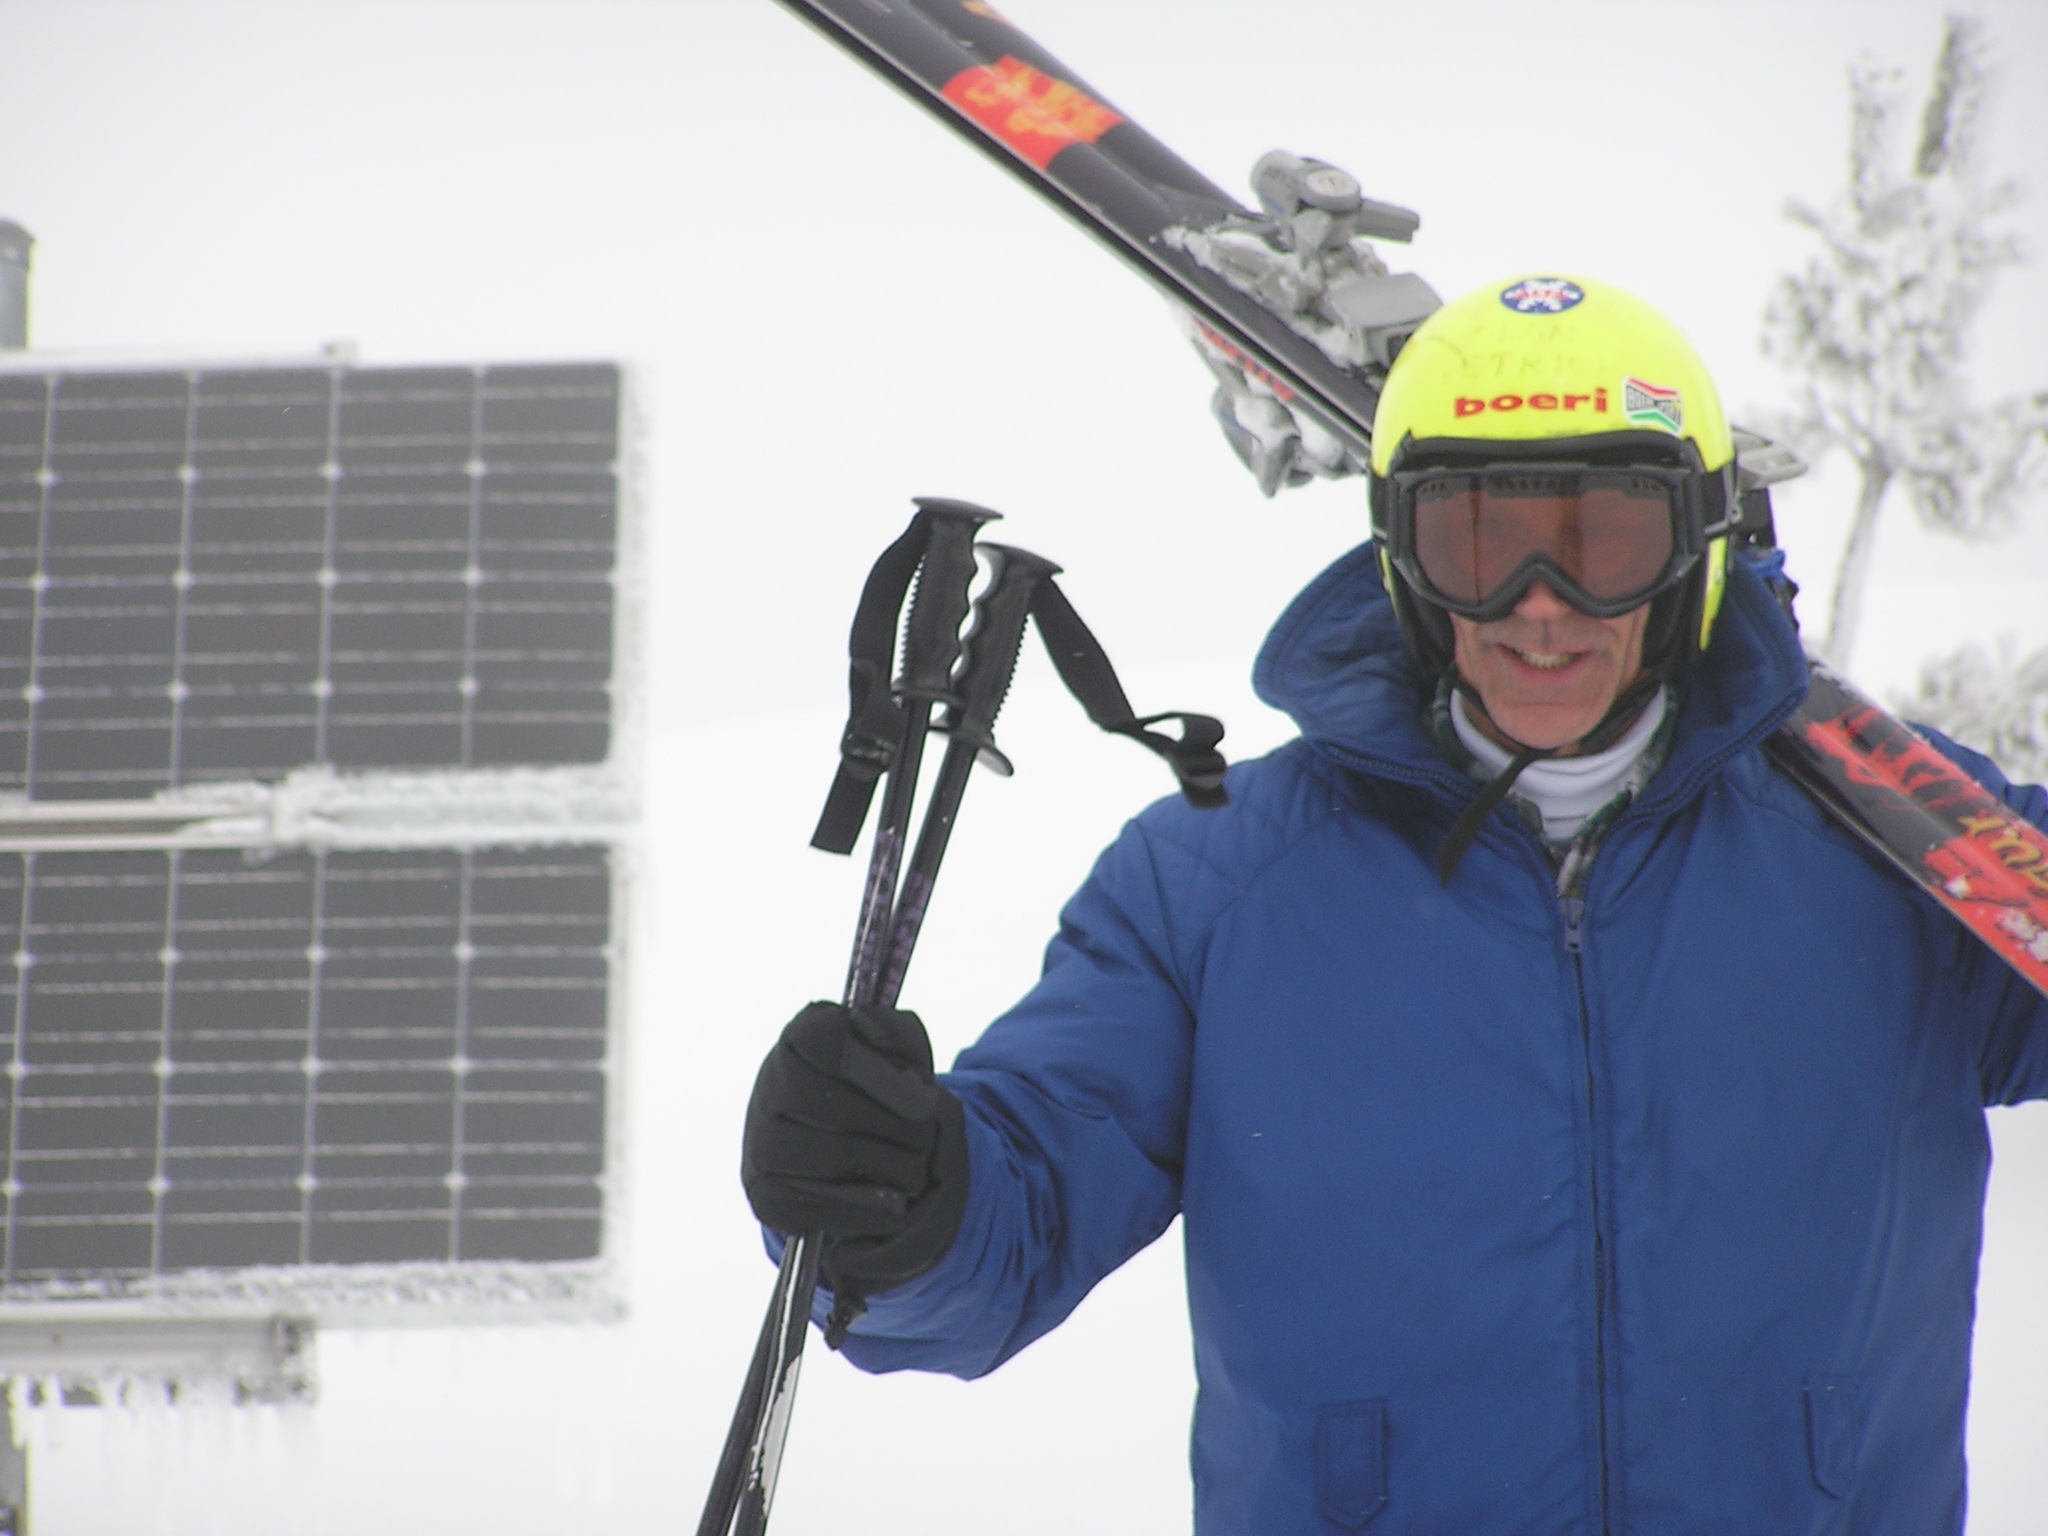 Dean skiing by solar panels